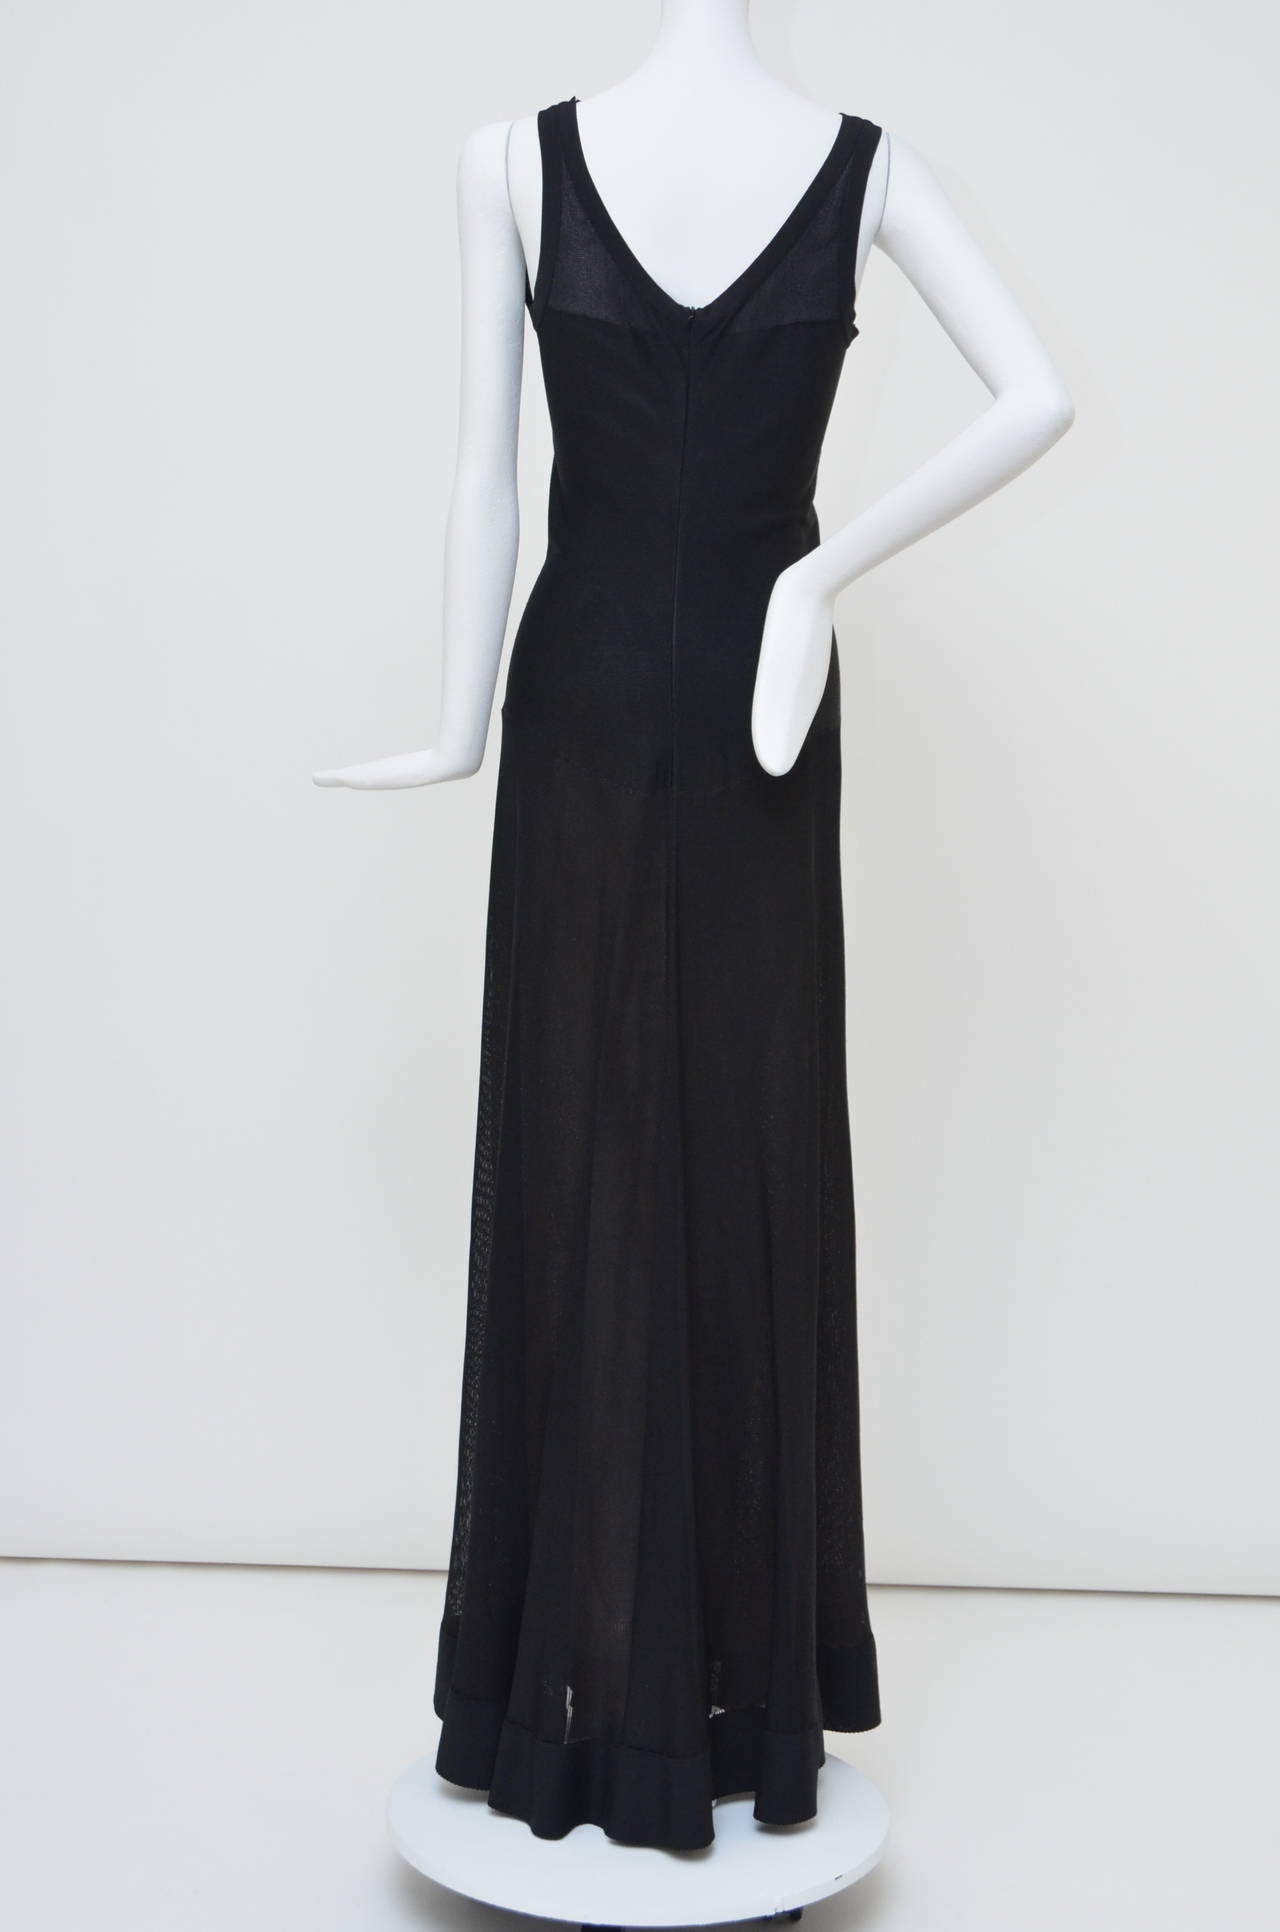 Azzedine Alaia  little black fine-knit dress. Sleeveless with  a boat-neck and a low back with skinny back straps, sweeping and gorgeous maxi length. This dress is incredibly dramatic and yet flattering  little black dress: it makes a statement but